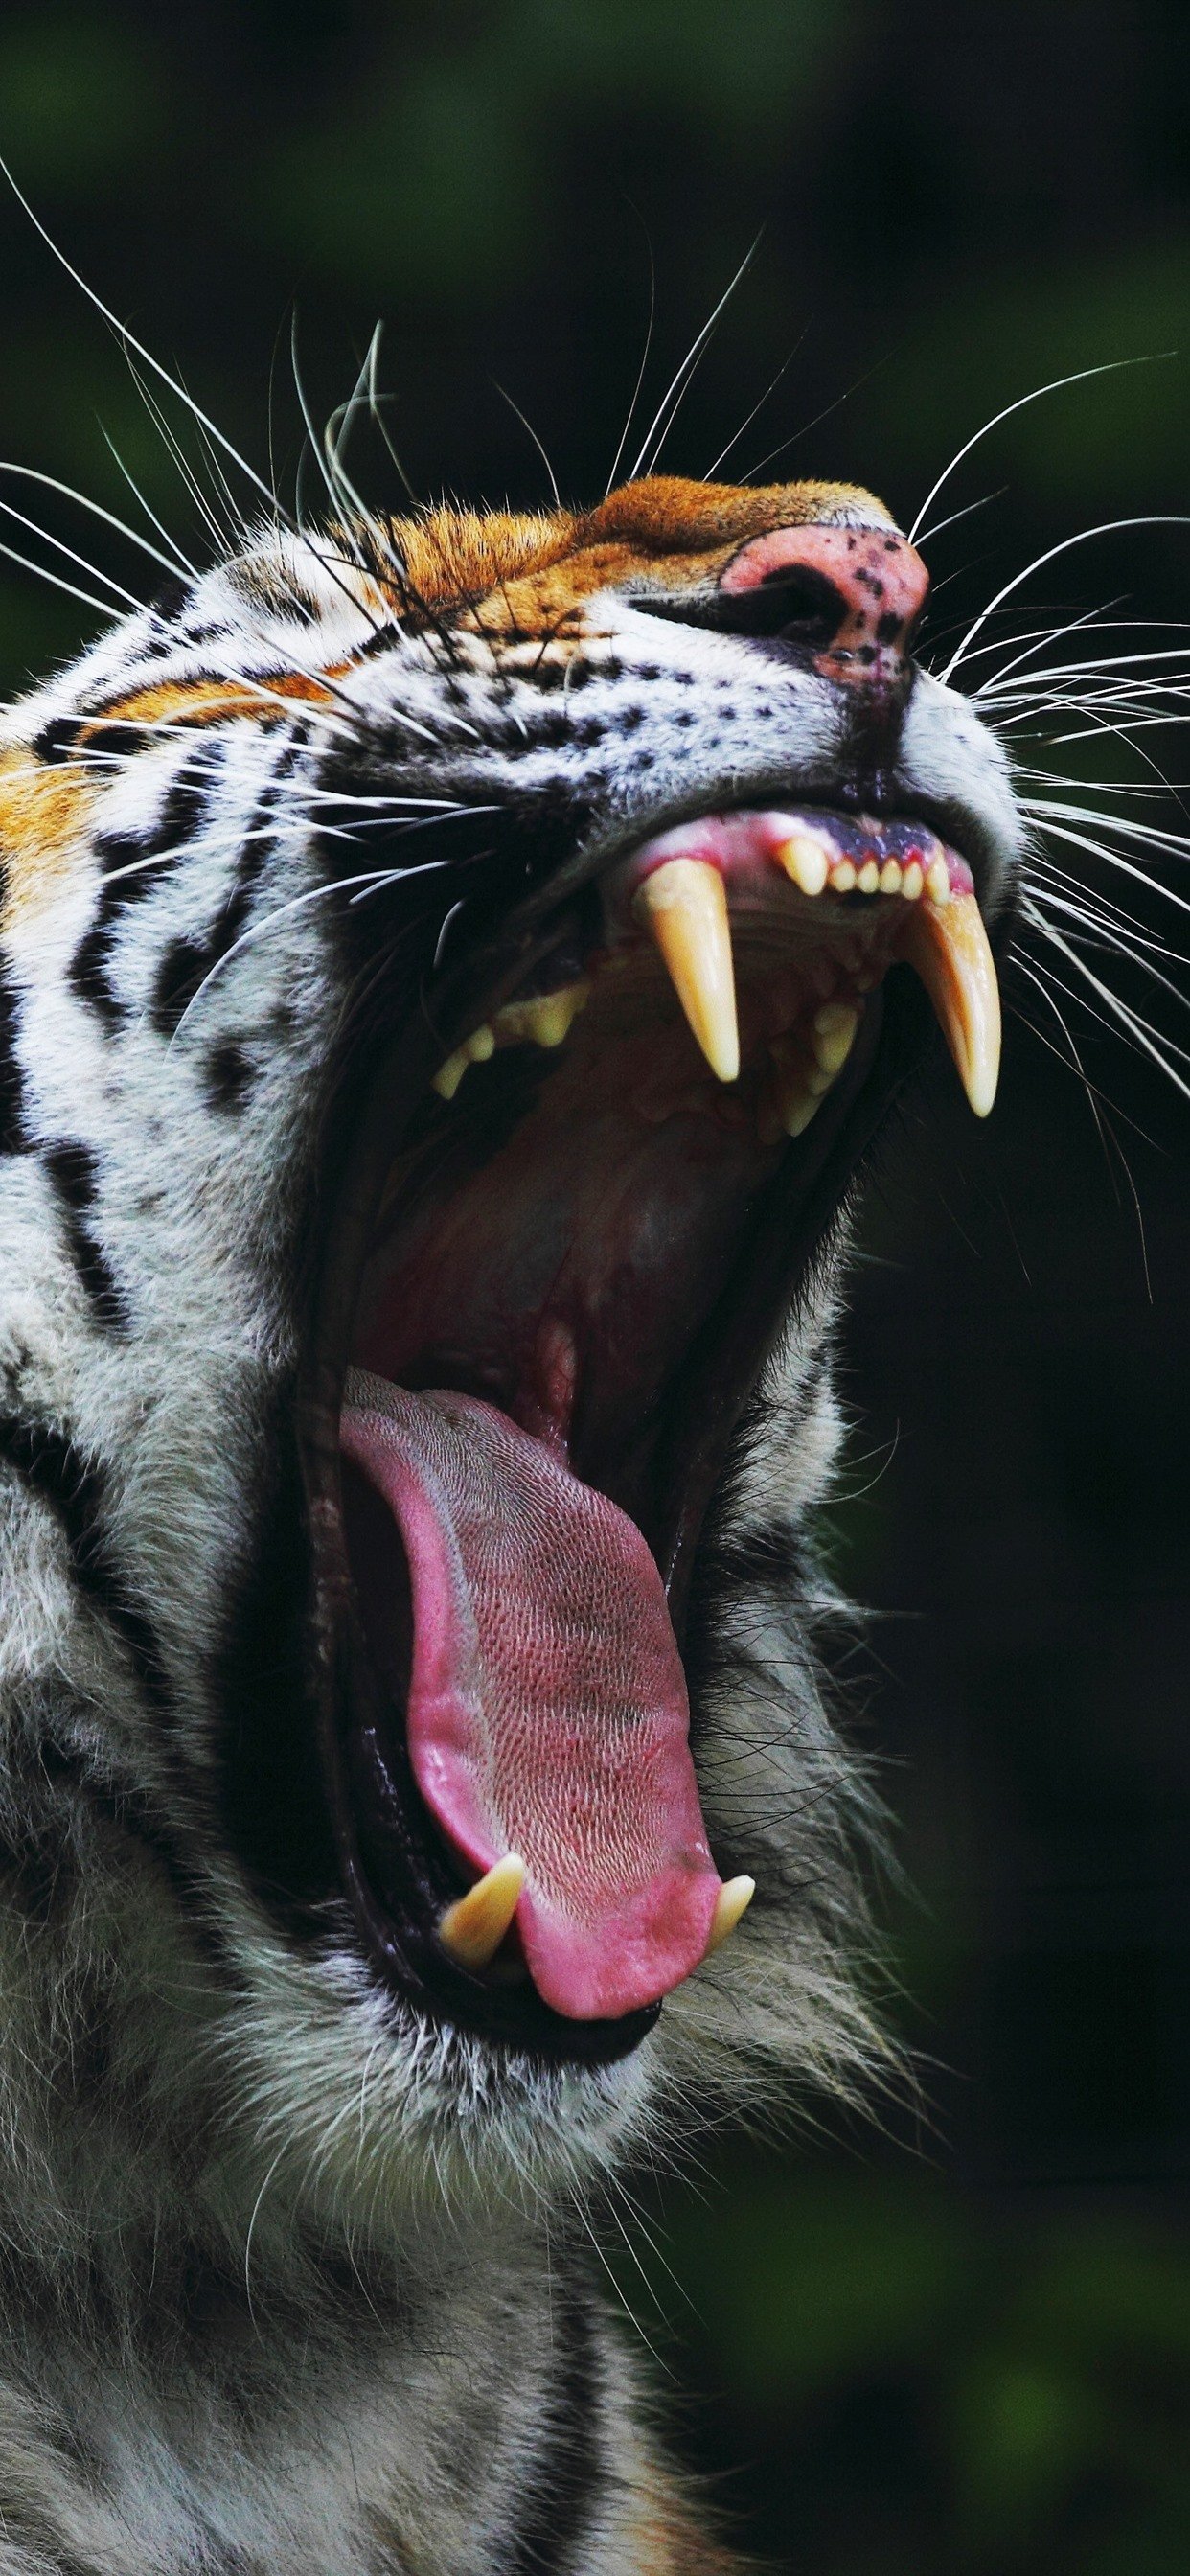 Tiger Yawn, Open Mouth, Teeth 1242x2688 IPhone 11 Pro XS Max Wallpaper, Background, Picture, Image